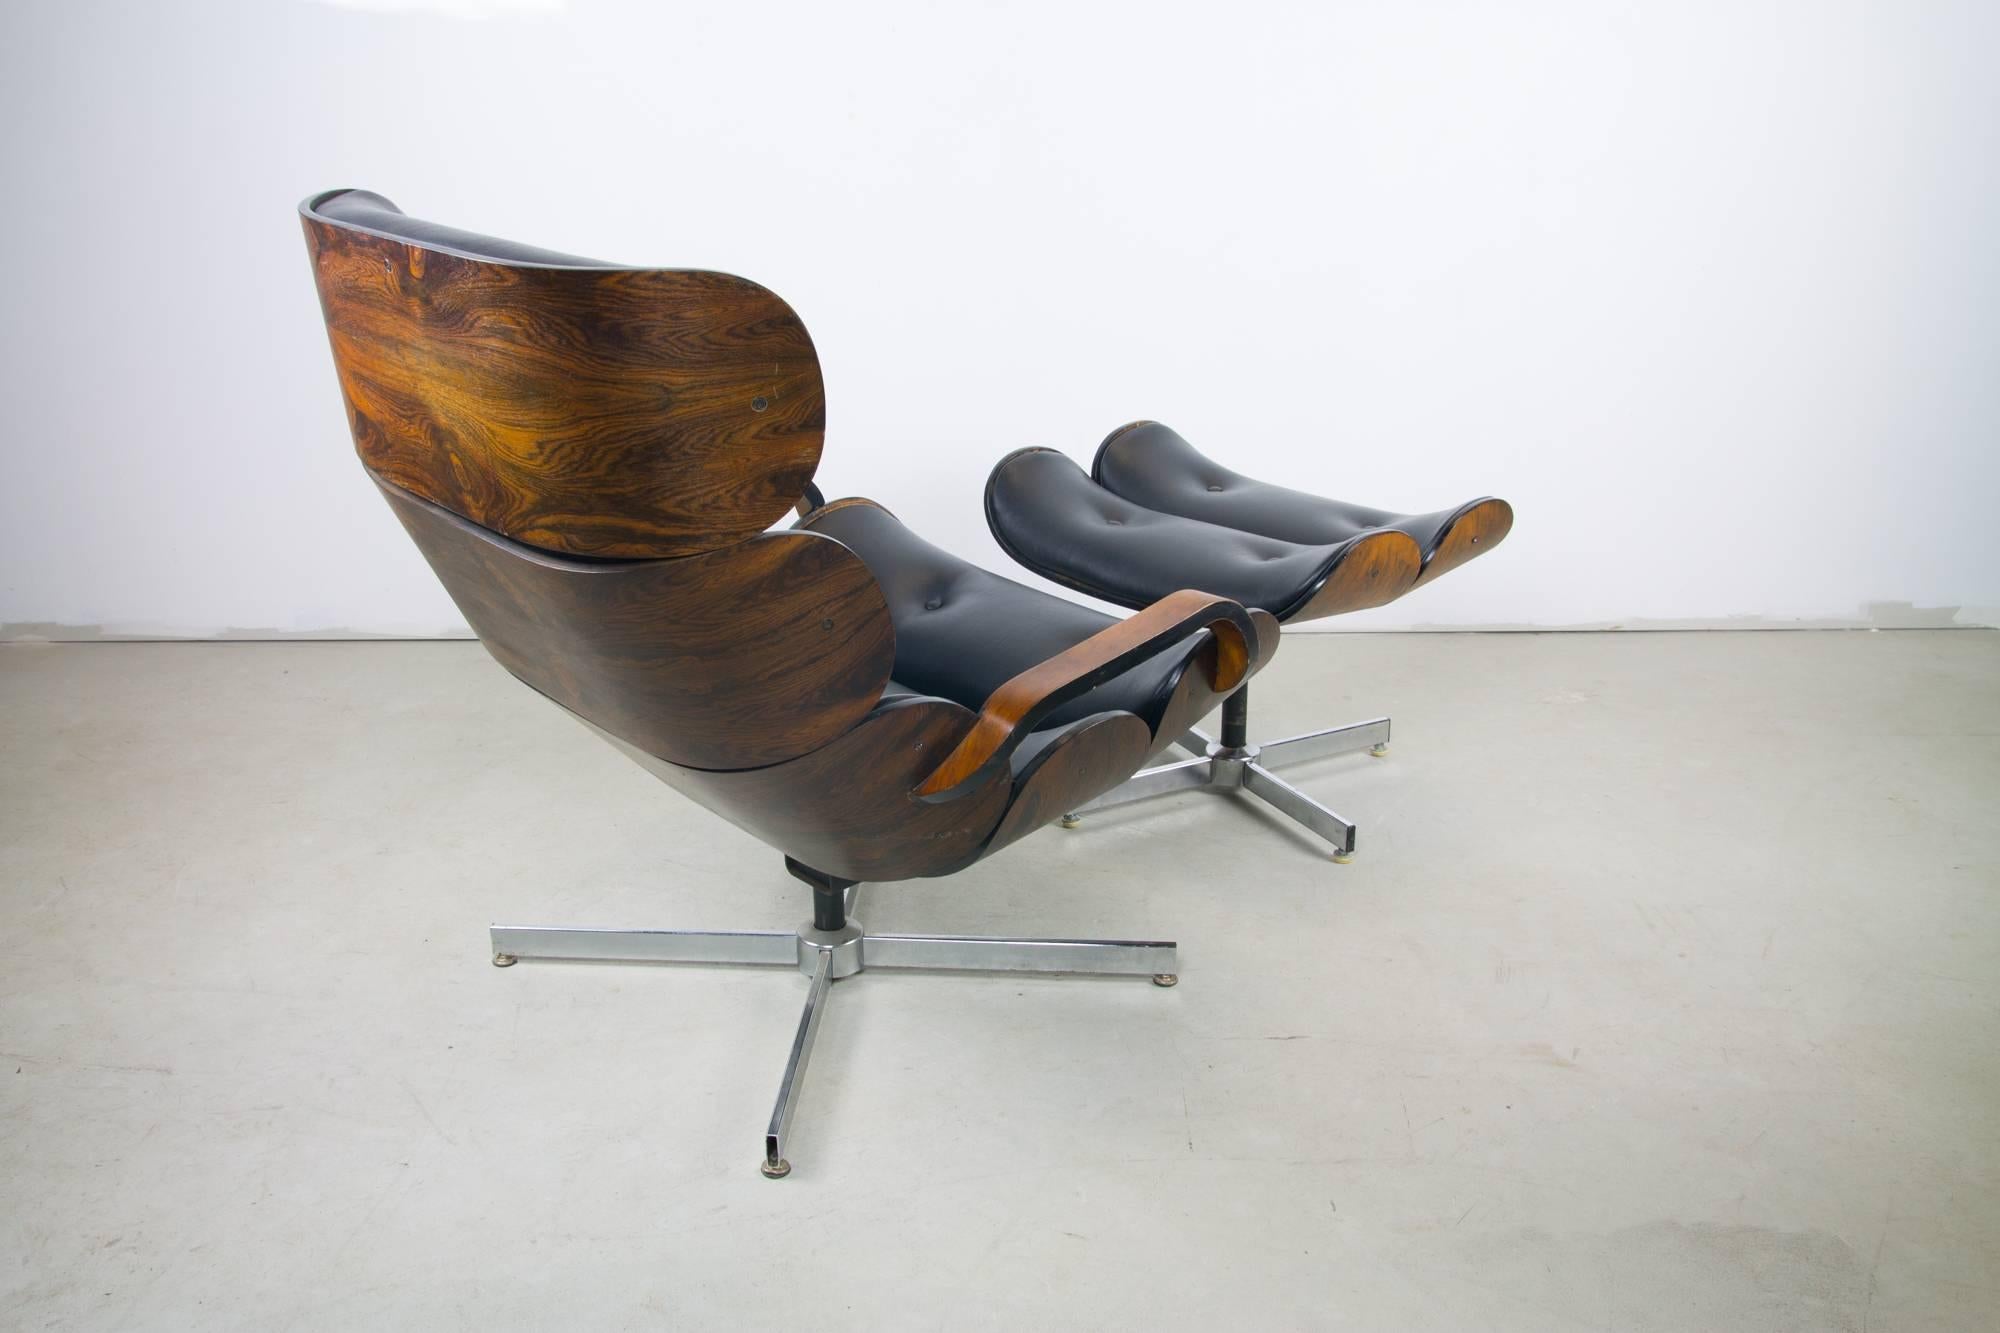 Stunning clamshell lounge chair and footstool by George Mullhause for Plycraft featuring buttoned Naugahyde engulfed by figural rosewood veneer. The chair swivels and tilts. 

Footstool measures: 16